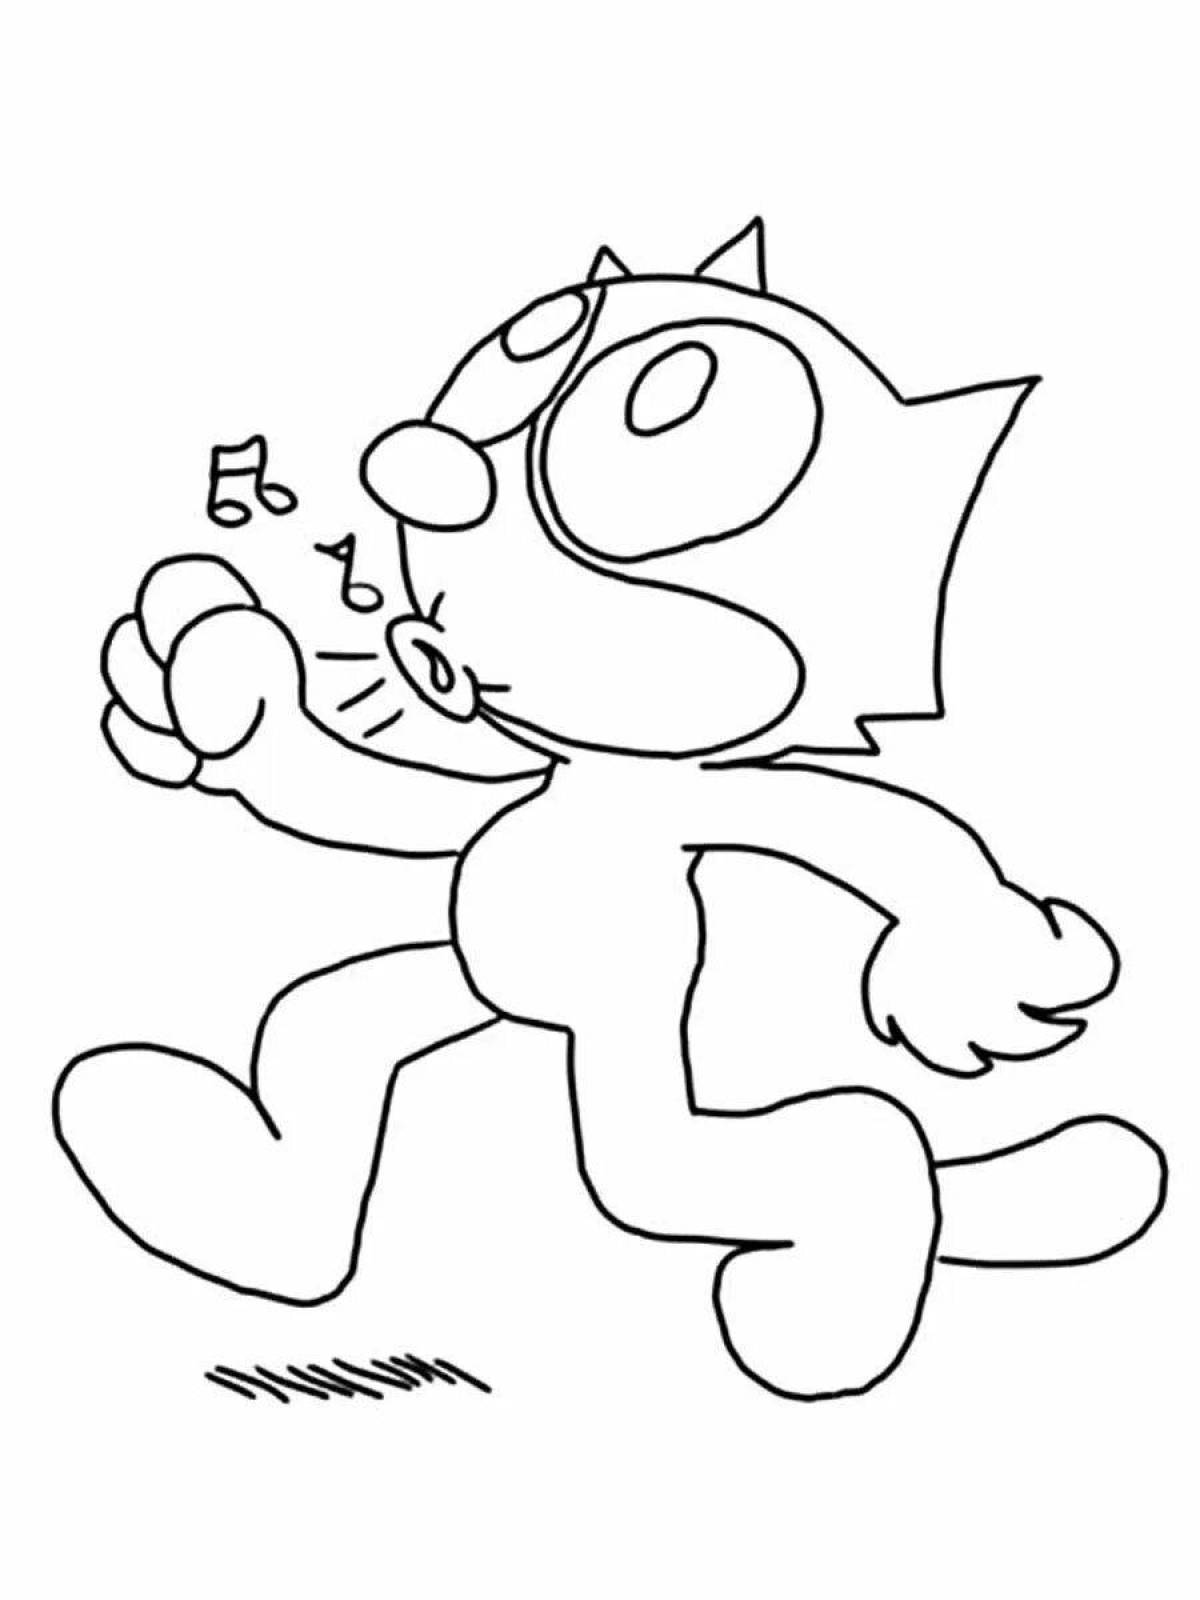 Curious cat coloring page